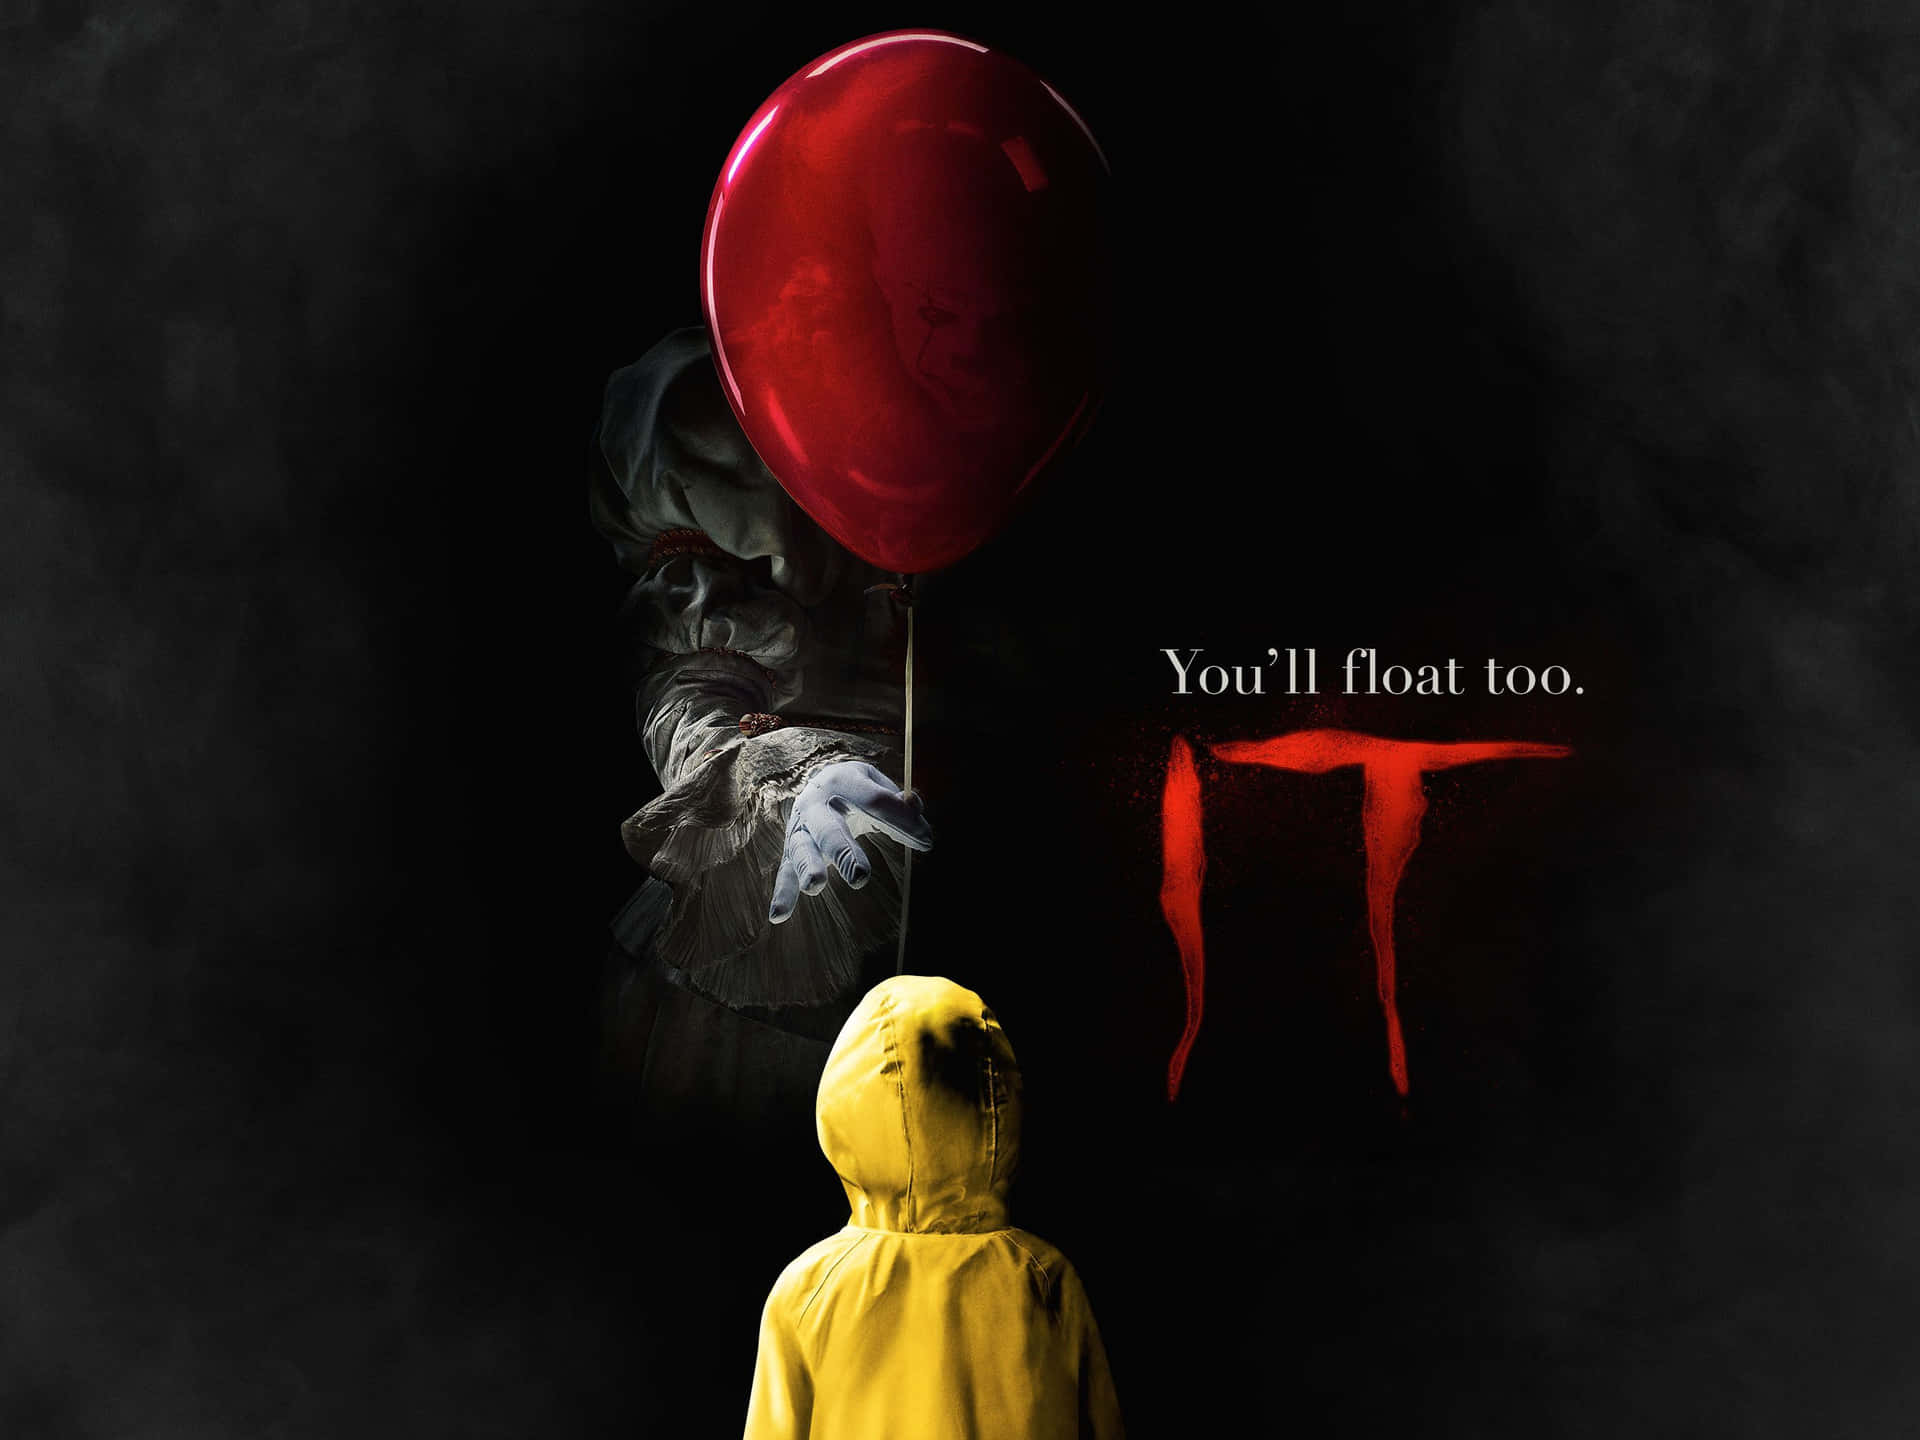 It Poster With A Child In Yellow And Red Wallpaper